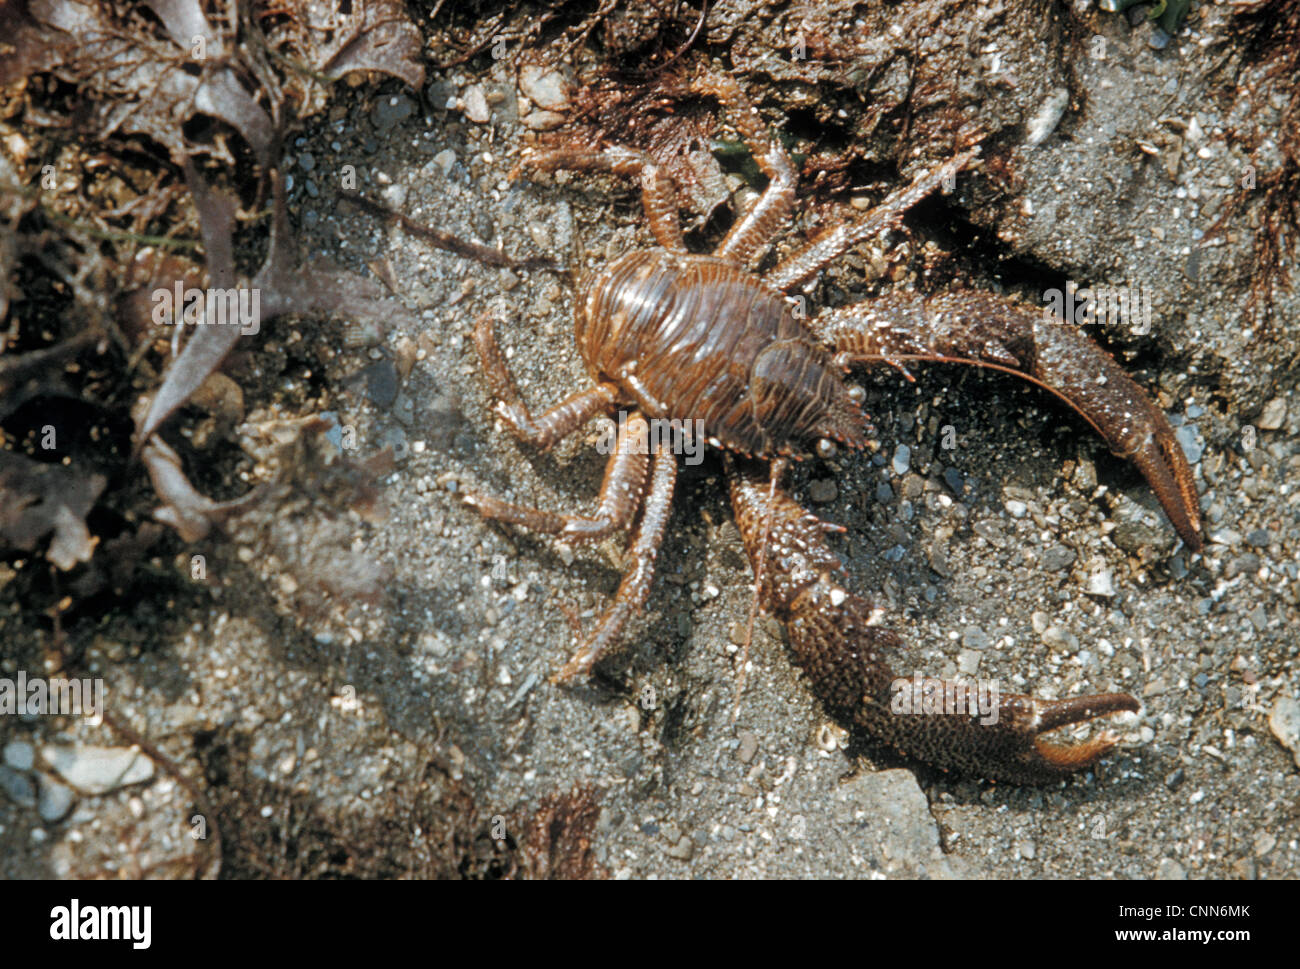 Lobster - Montagu's Plated(Galathea squamifera) close-up on shore at extreme low water mark Stock Photo